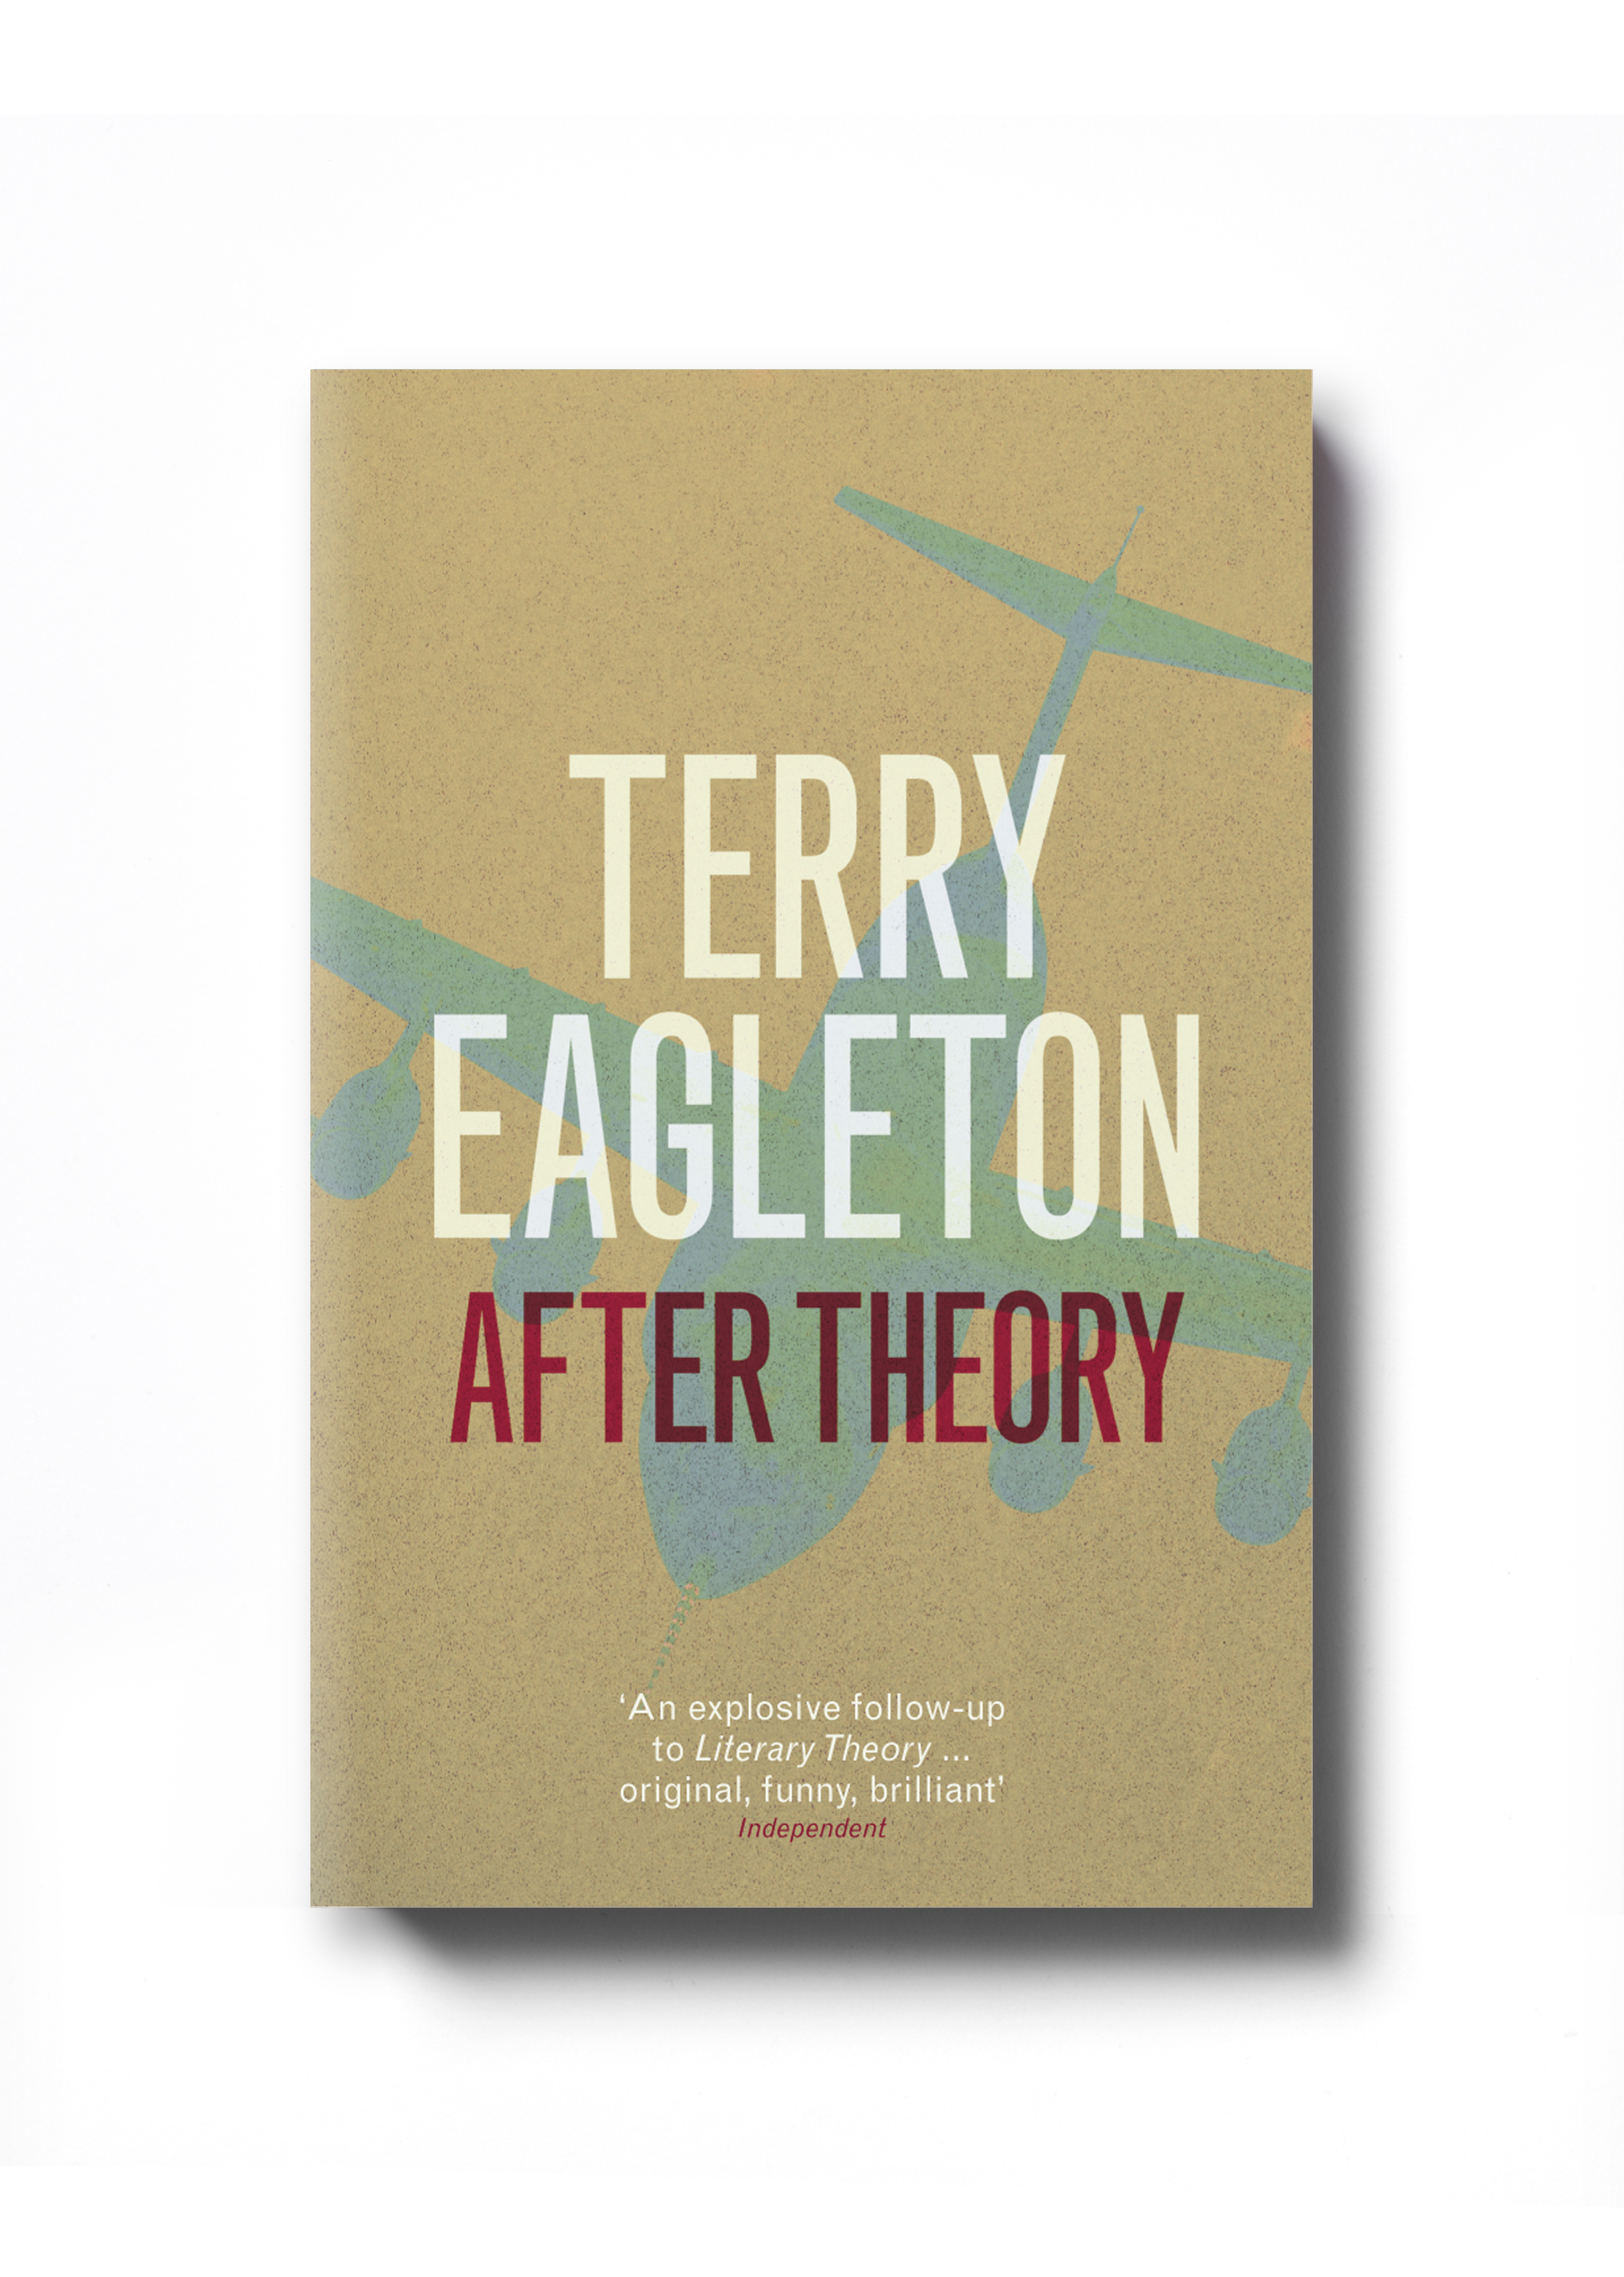  After Theory by Terry Eagleton - Design: Jim Stoddart  